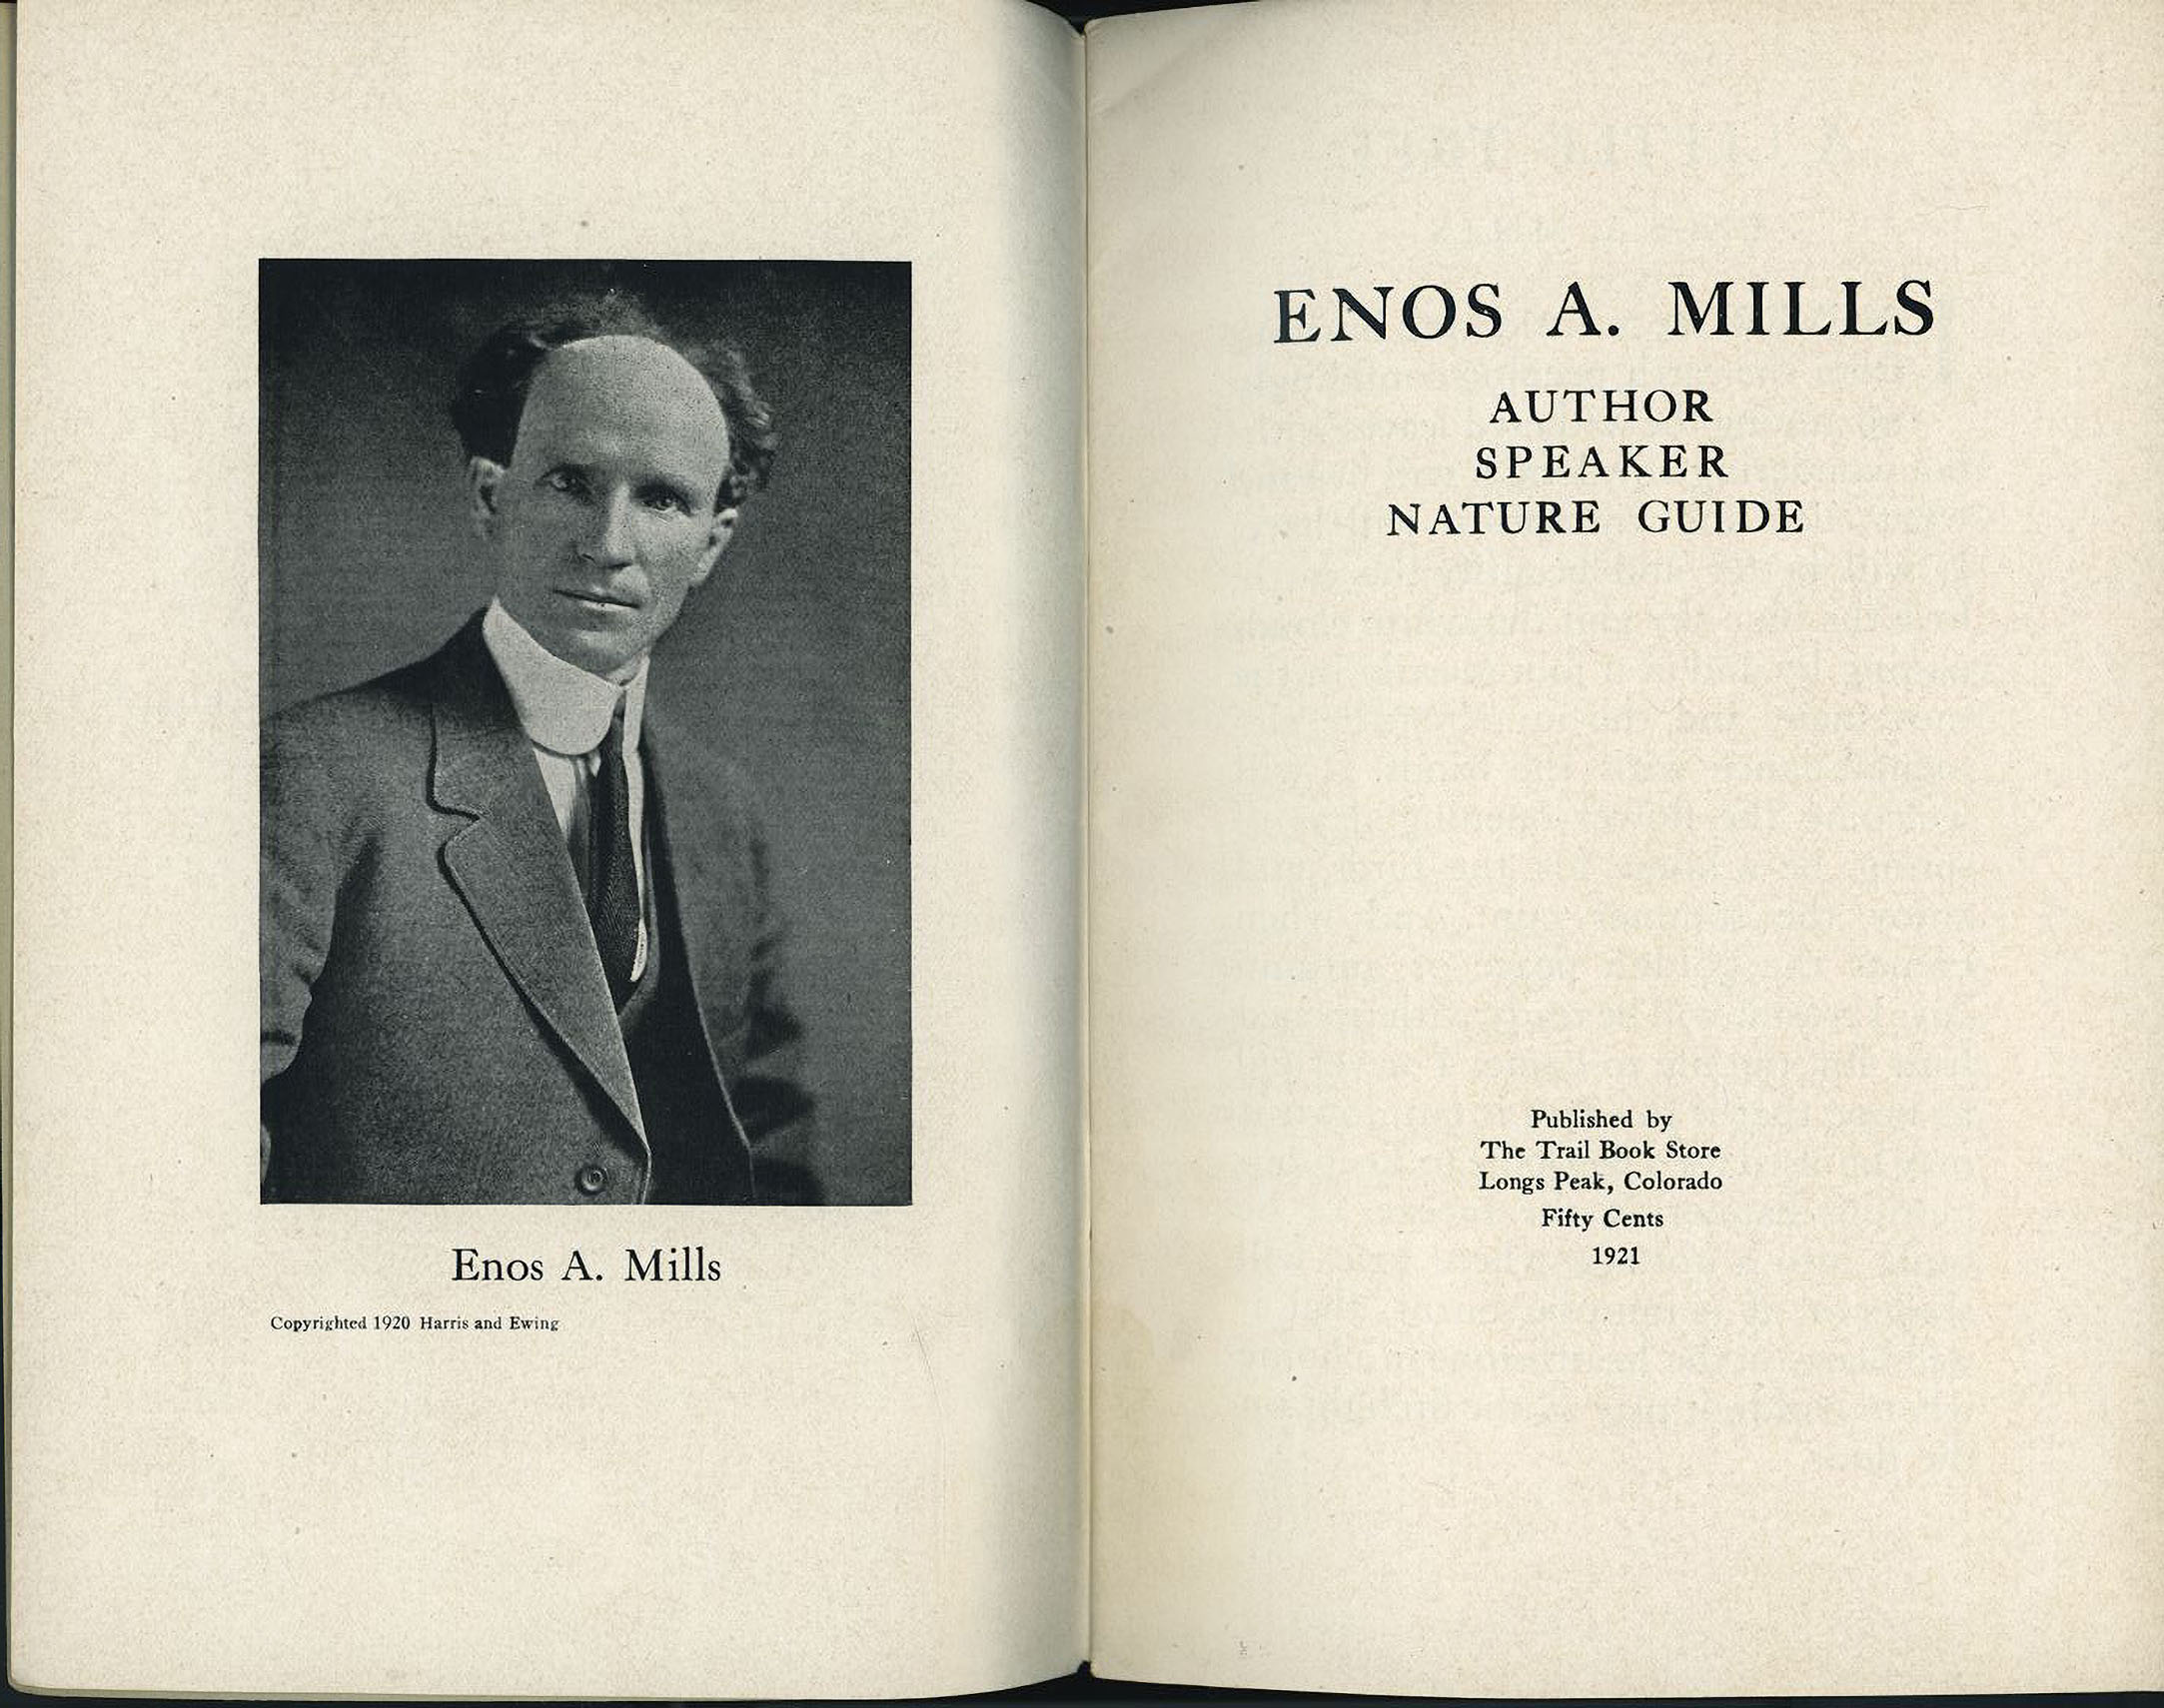 ENOS A. MILLS AUTHOR SPEAKER NATURE GUIDE signed pamphlet 1921